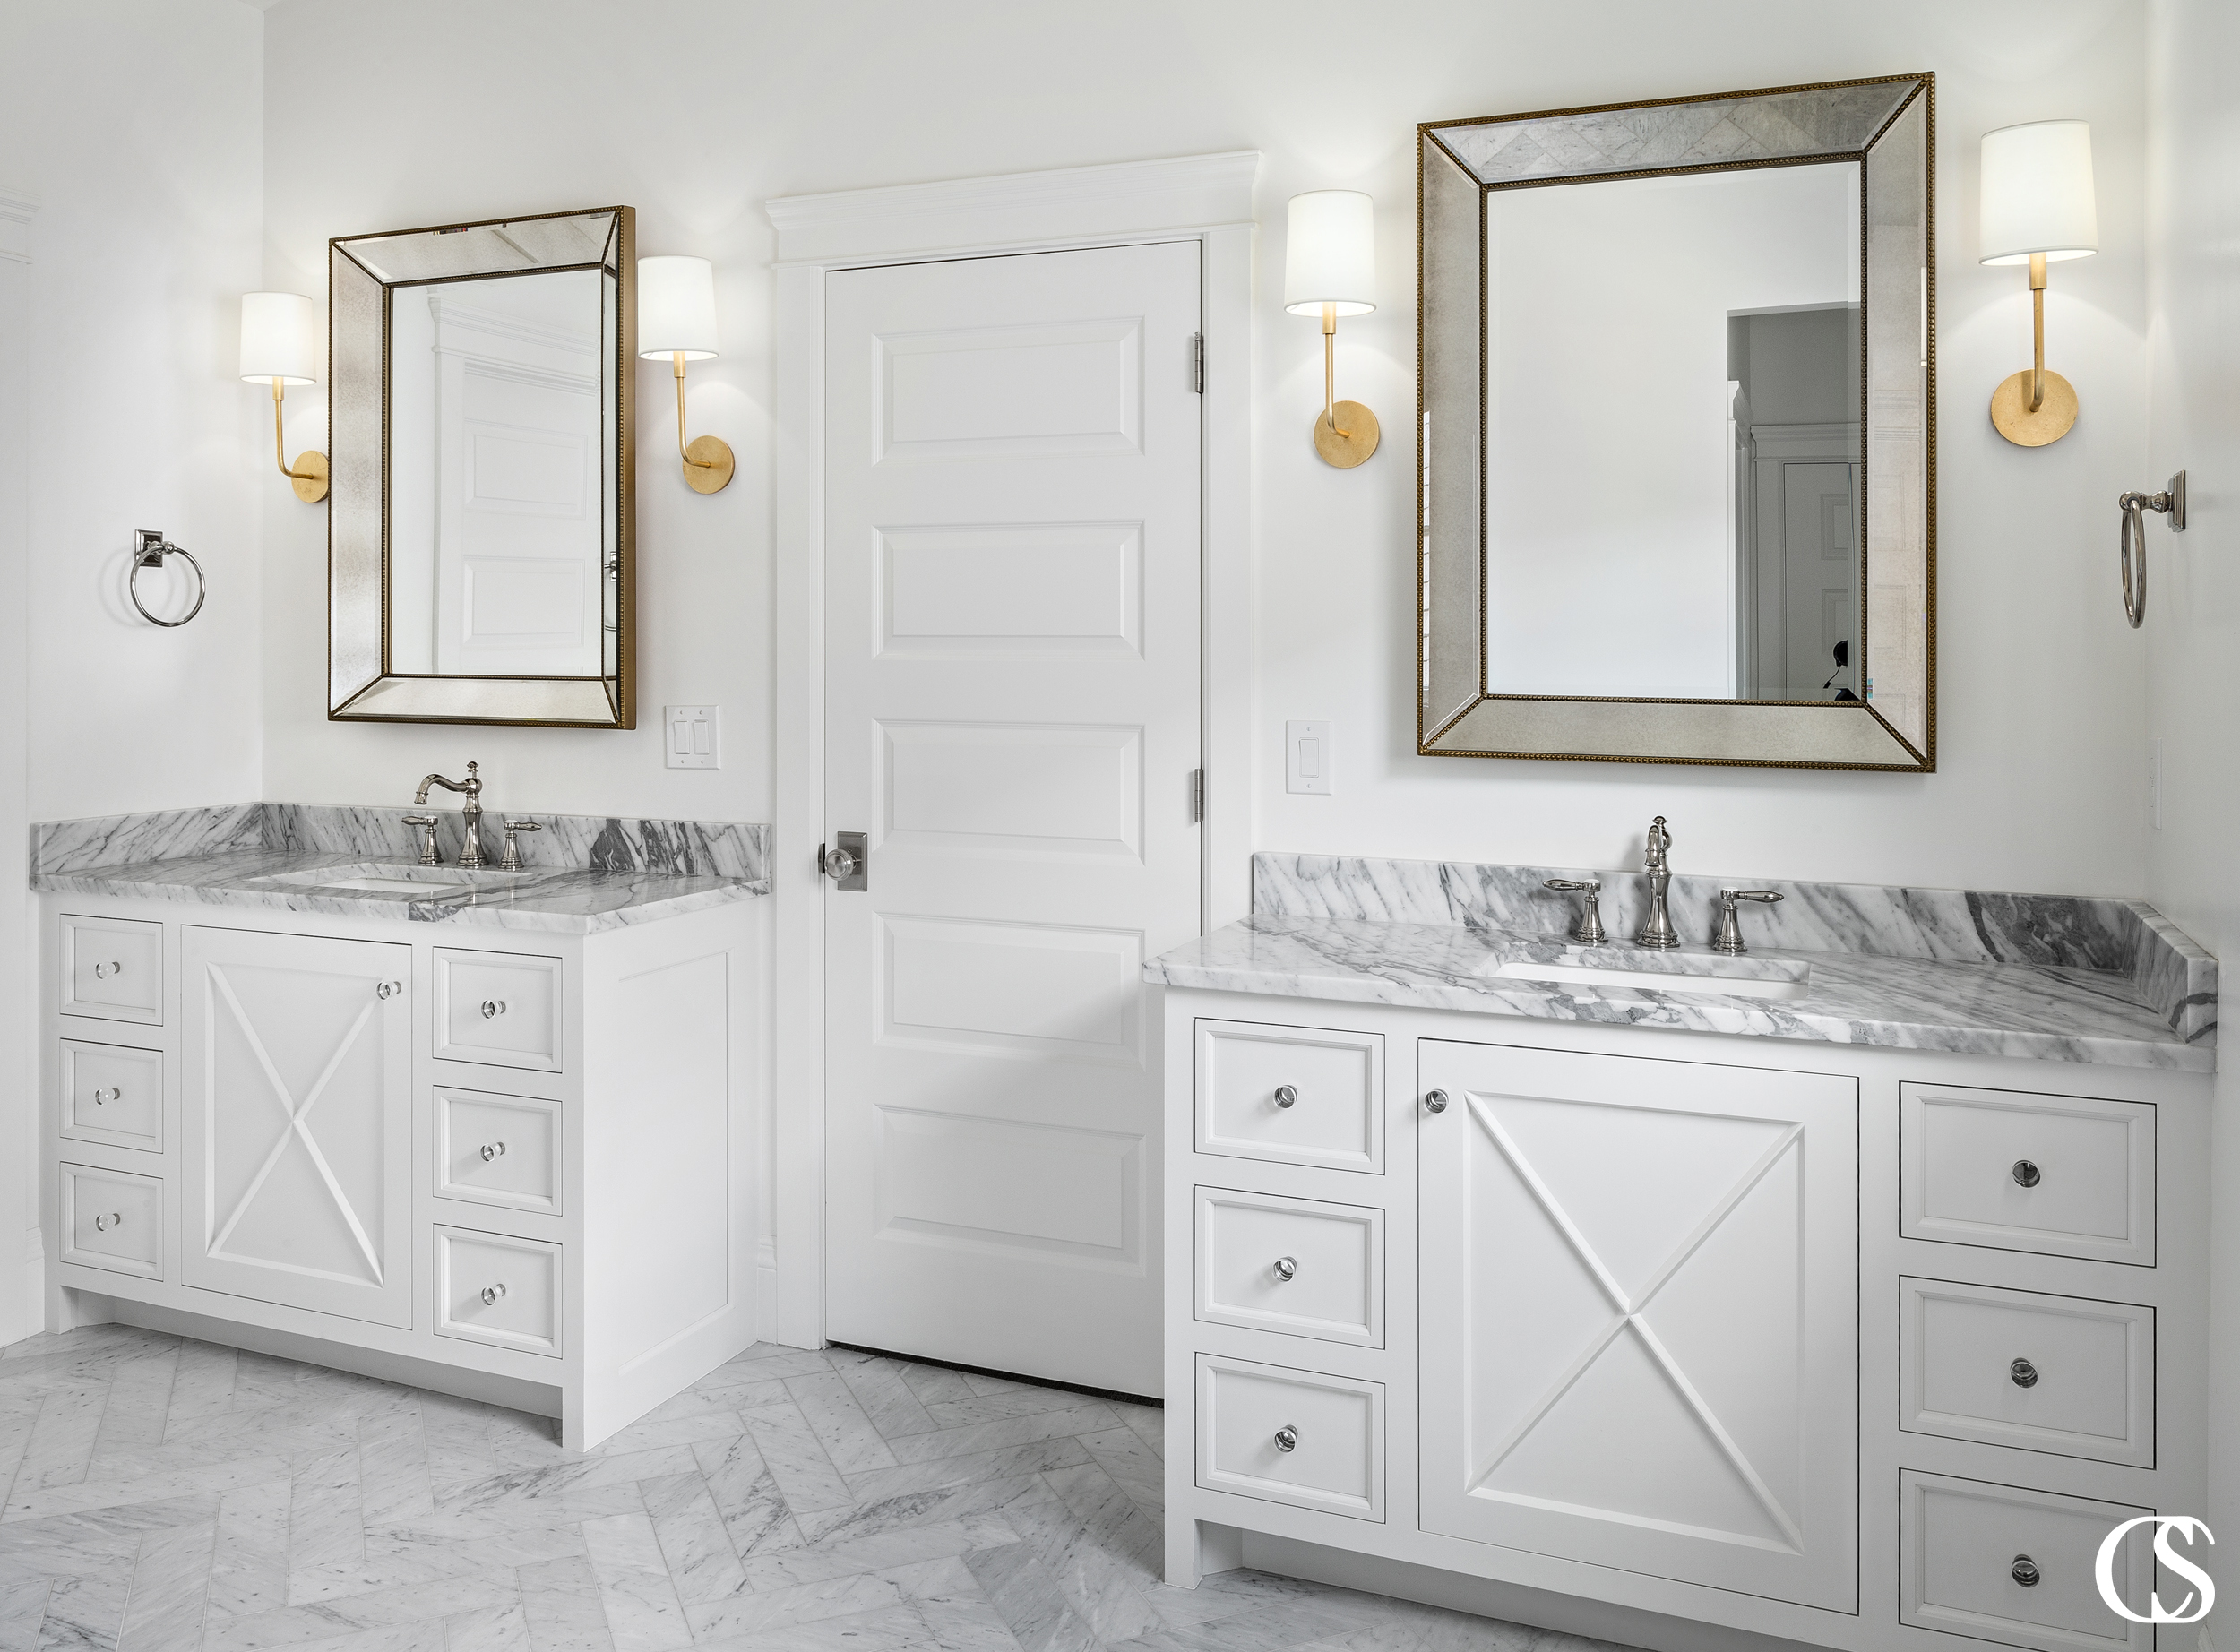 Custom bathroom cabinet design can combine multiple aesthetics, like the modern and farmhouse looks you see coming together in these matching bathroom vanities.